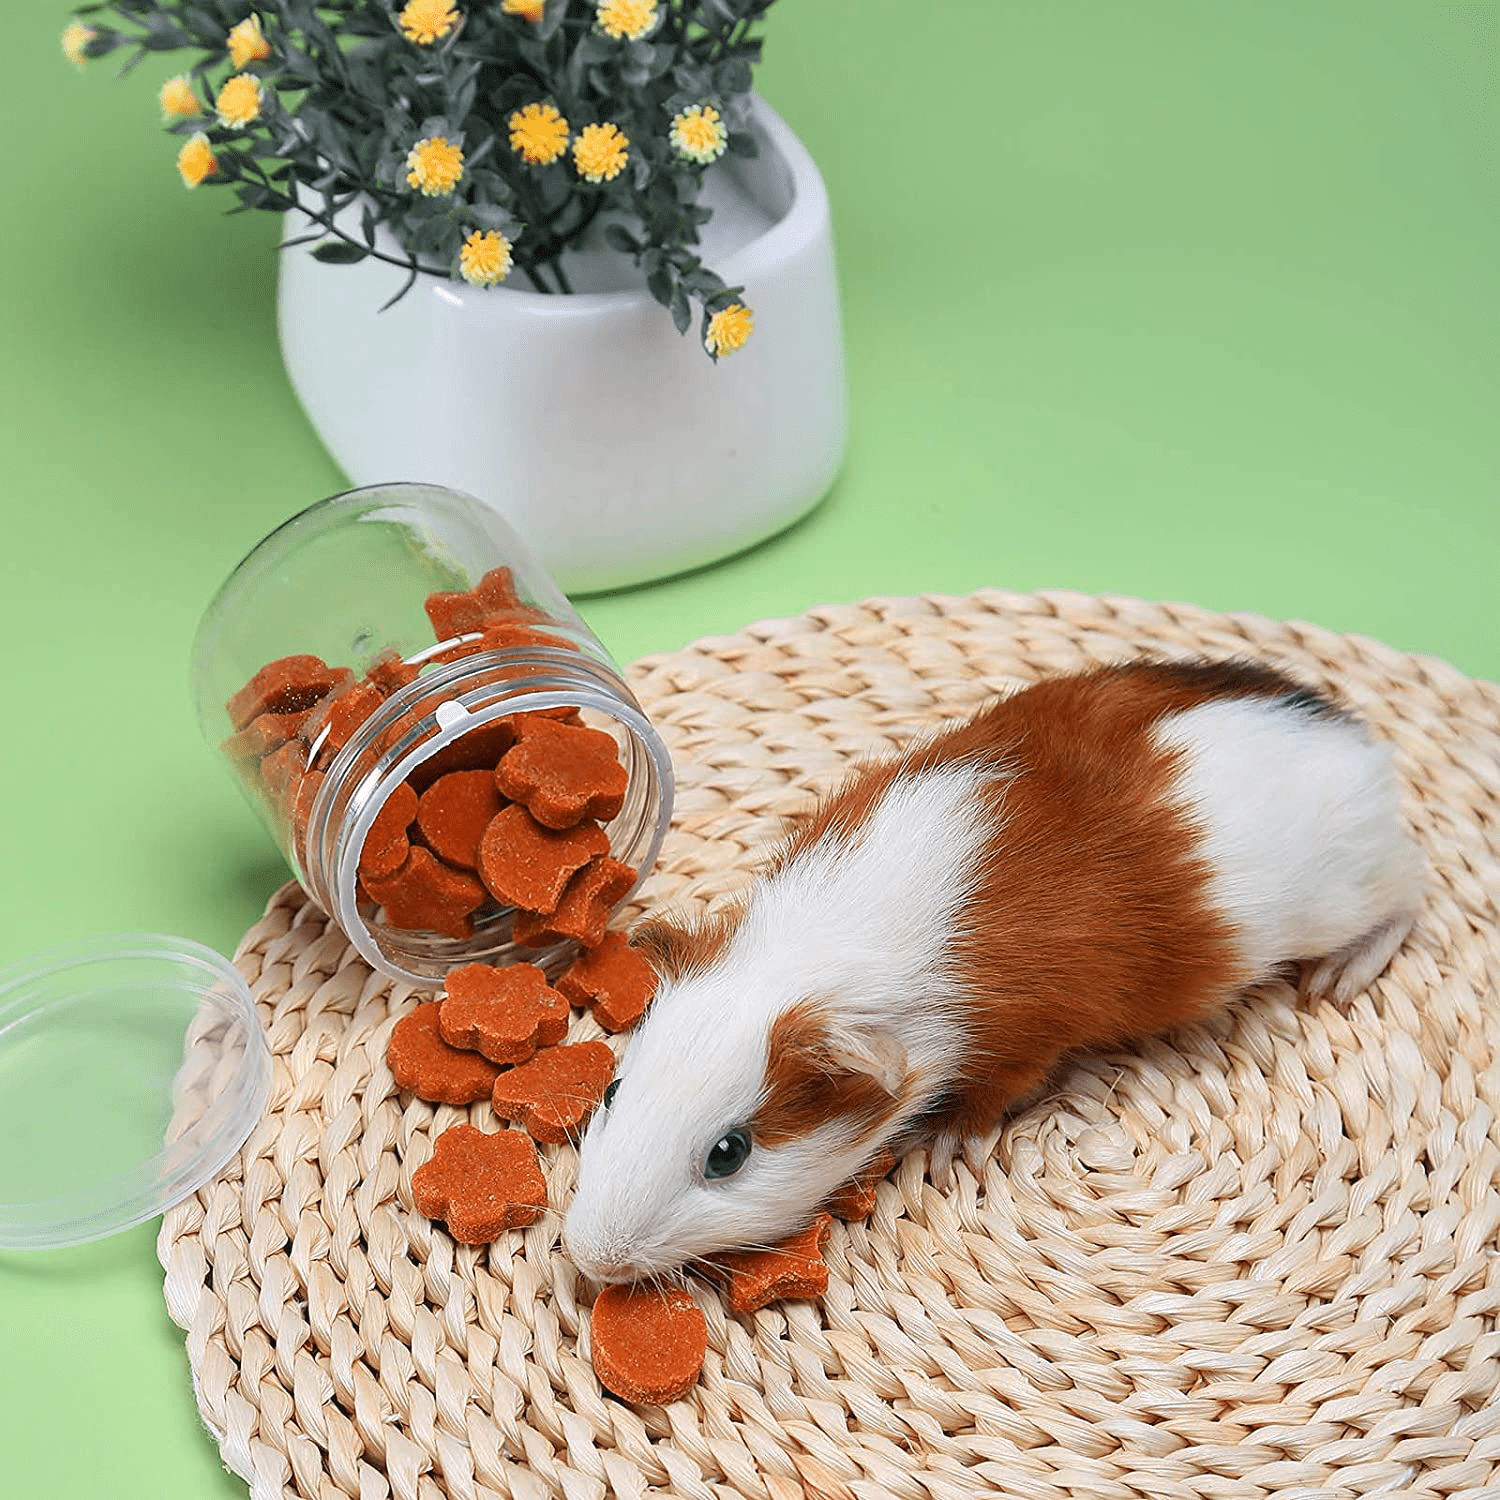 X-Pet Rabbit Chew Toys, Guinea Pig Treats 100% Natural Material Garden Stuff Flavored Biscuit&Grass Cake, Small Animals Teeth Grinding Chewing Suitable for Bunny Hamster Chinchilla Dwarf Gerbils